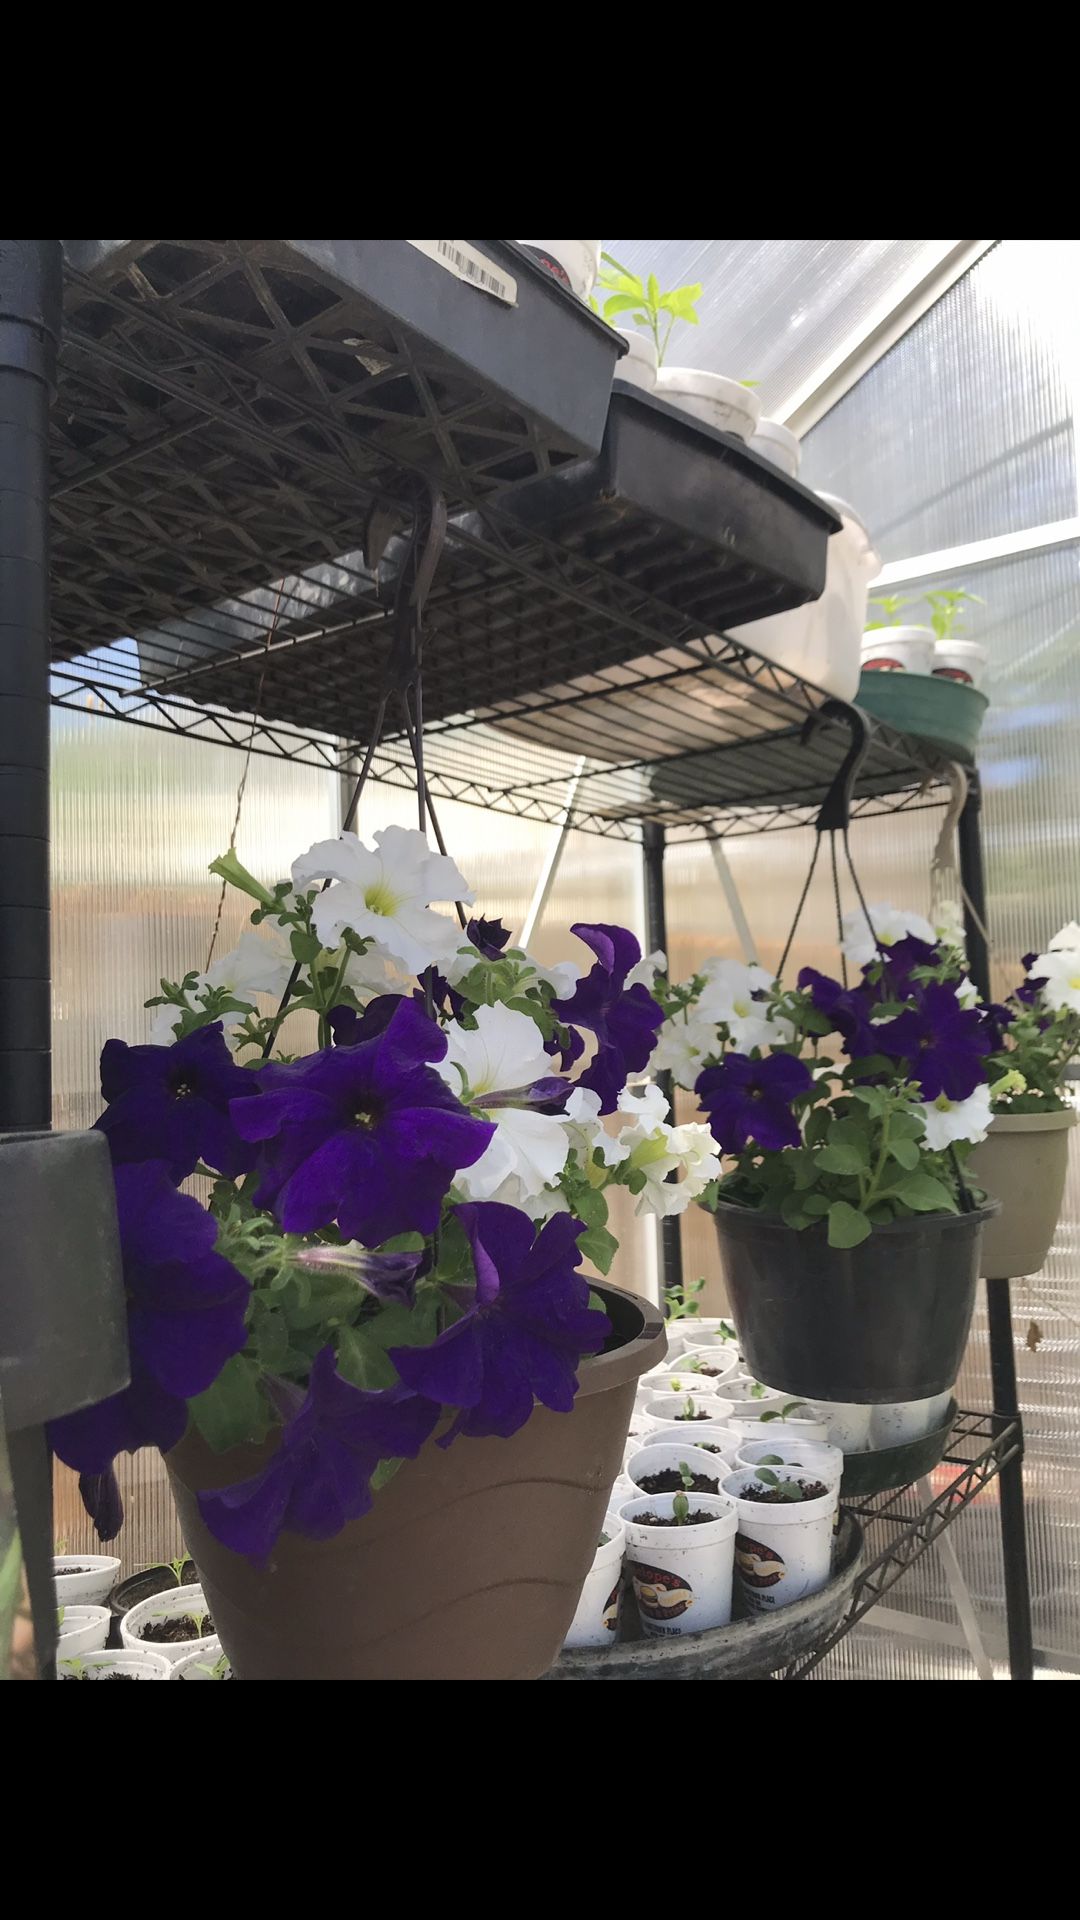 Beautiful mix colors of petunia flowers on hanging pots